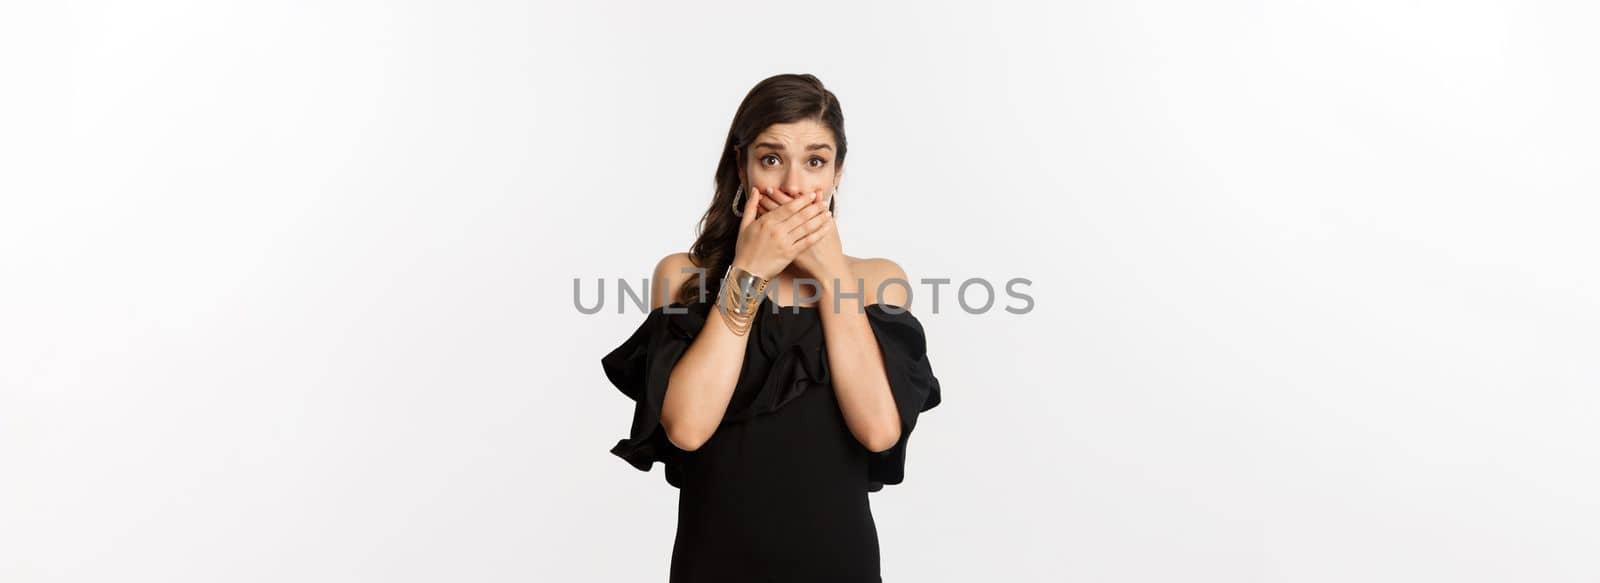 Fashion and beauty. Attractive woman in black dress cover mouth and gasping shocked, staring at camera worried, standing over white background.